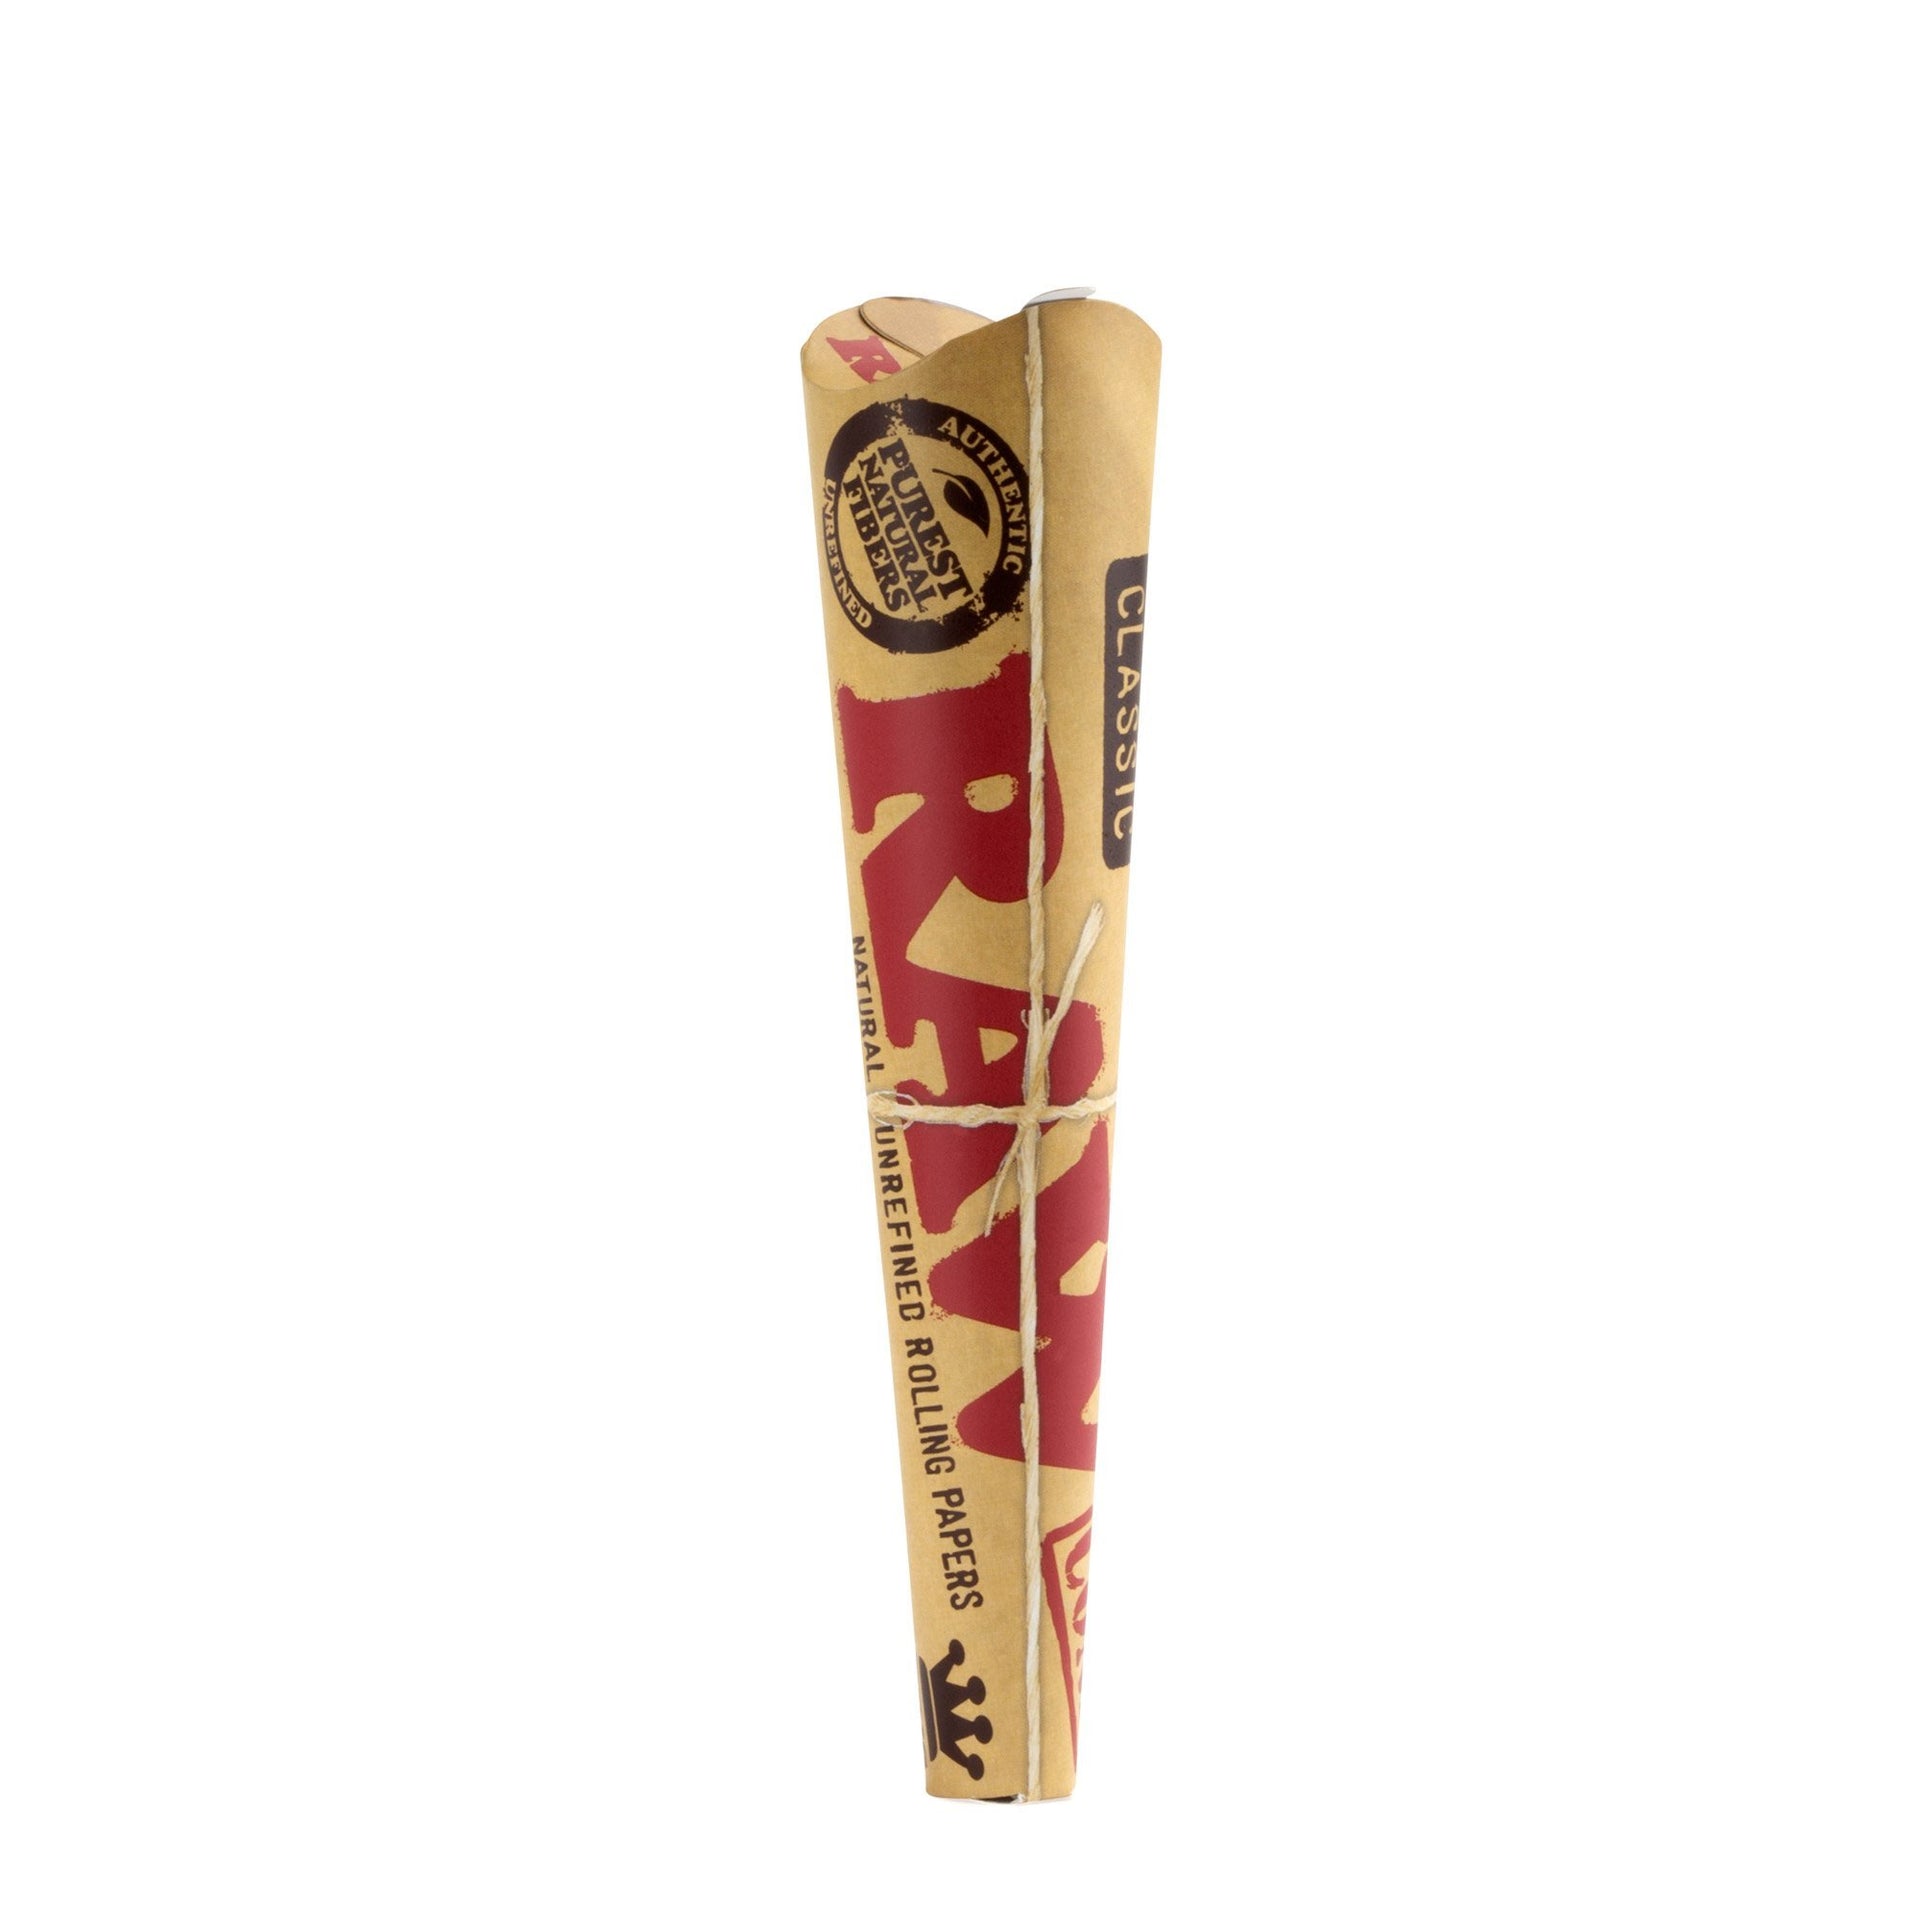 RAW King Size Pre-Rolled Cone Pack - 420 Science - The most trusted online smoke shop.